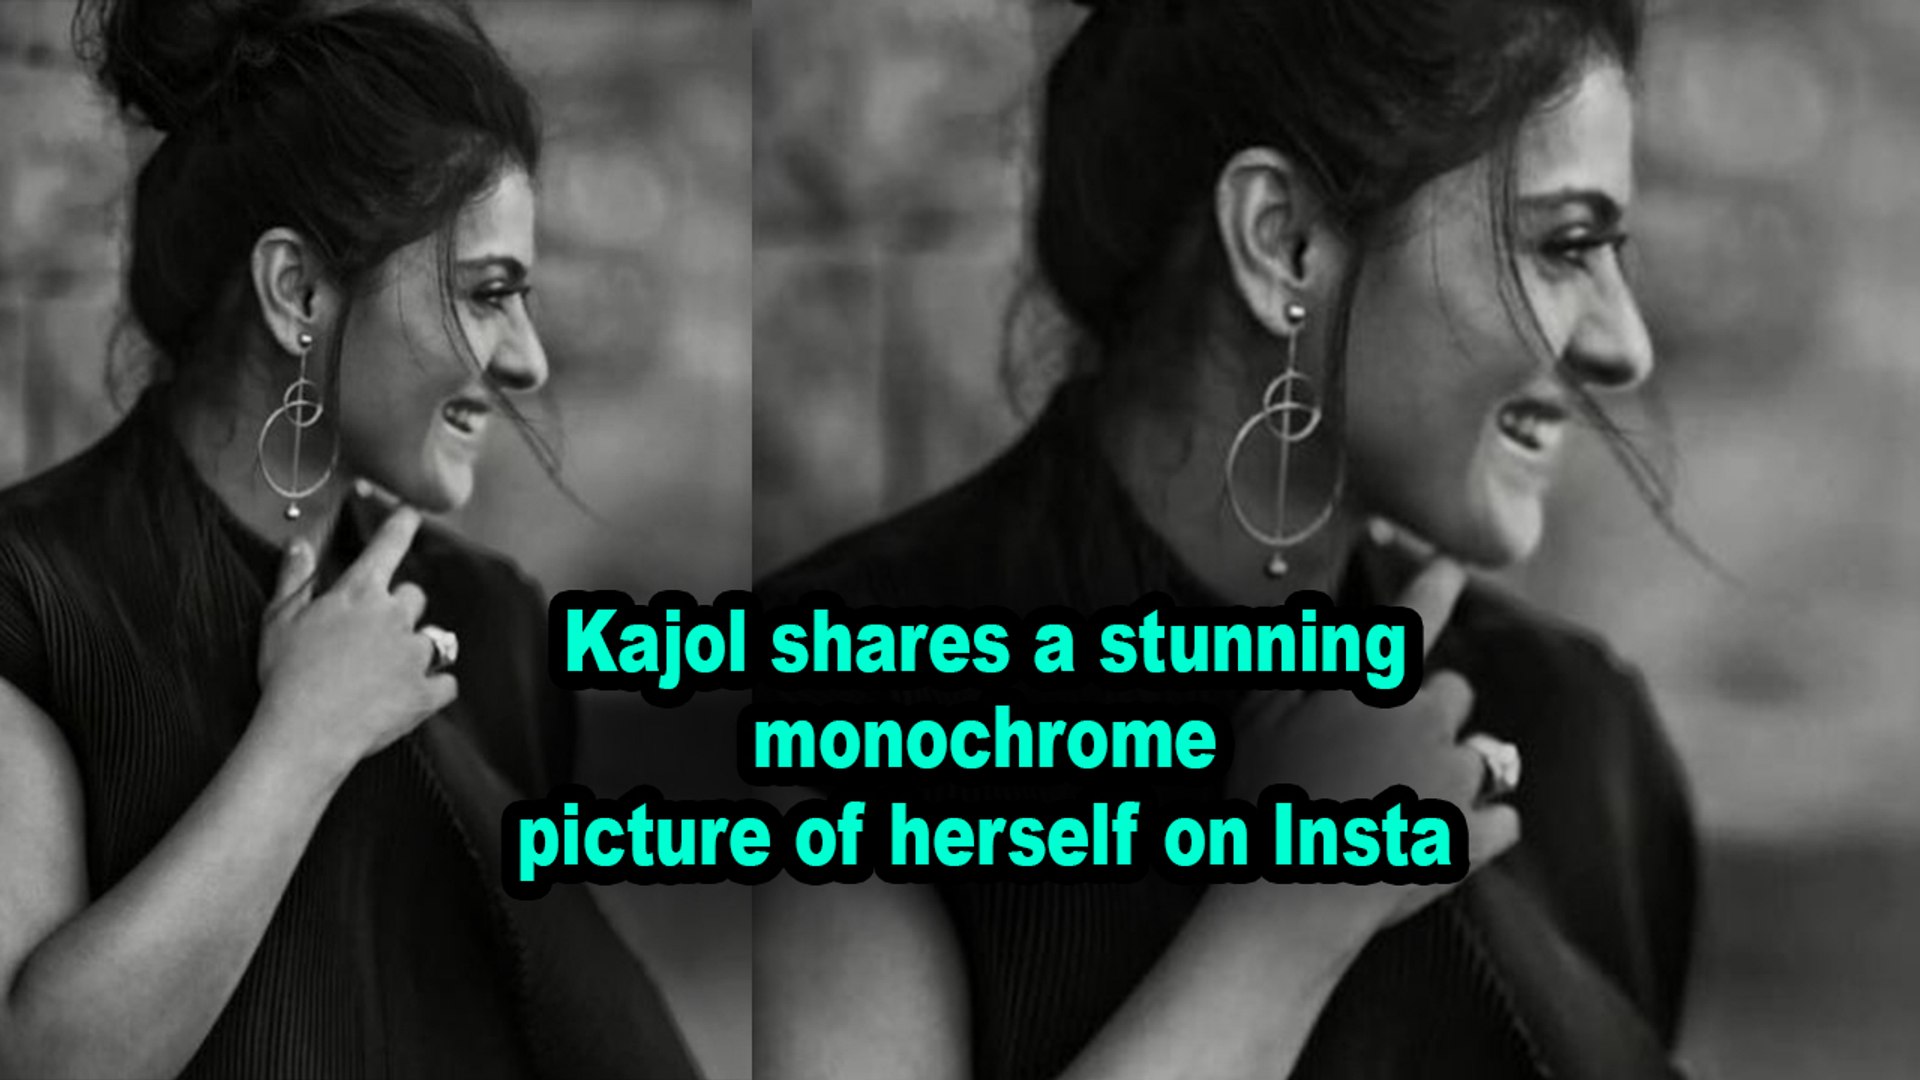 Kajol shares a stunning monochrome picture of herself on Insta